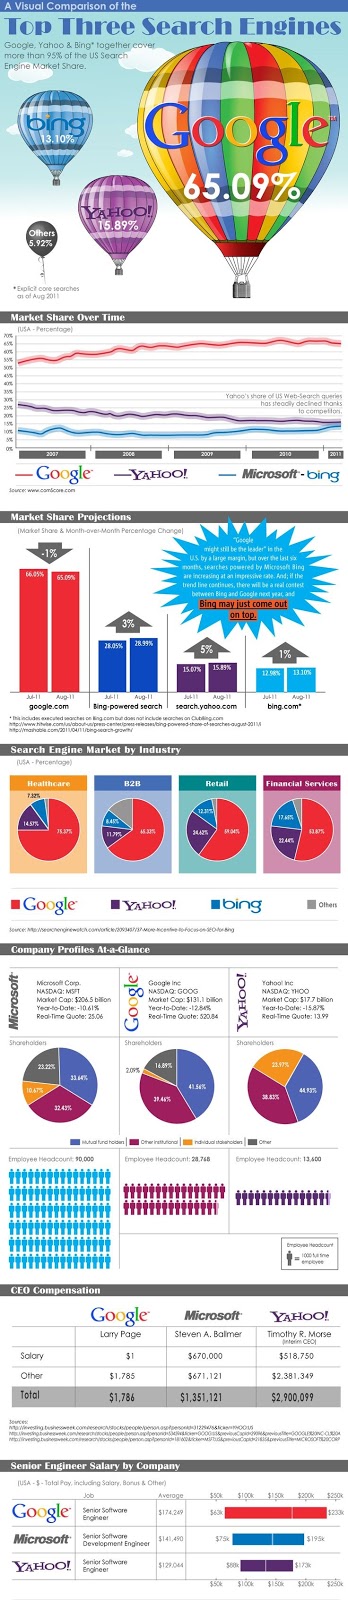 Comparison of the Top Three Search Engines: Bing+Yahoo > Google? [INFOGRAPHIC]